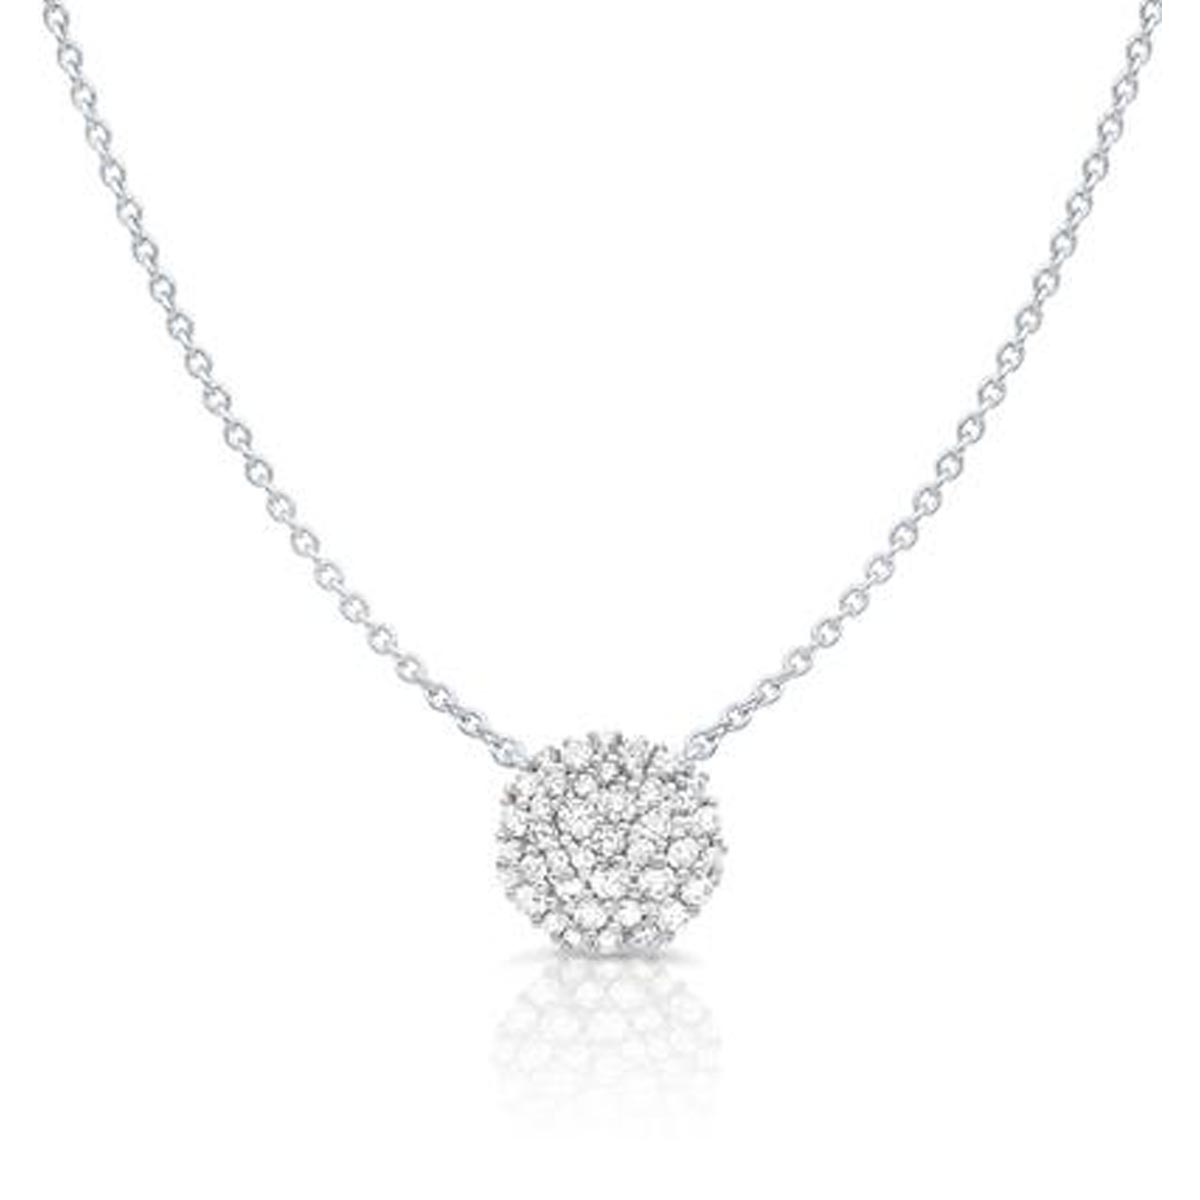 Crislu Cubic Zirconia Cluster Necklace in Sterling Silver with Platinum Finish